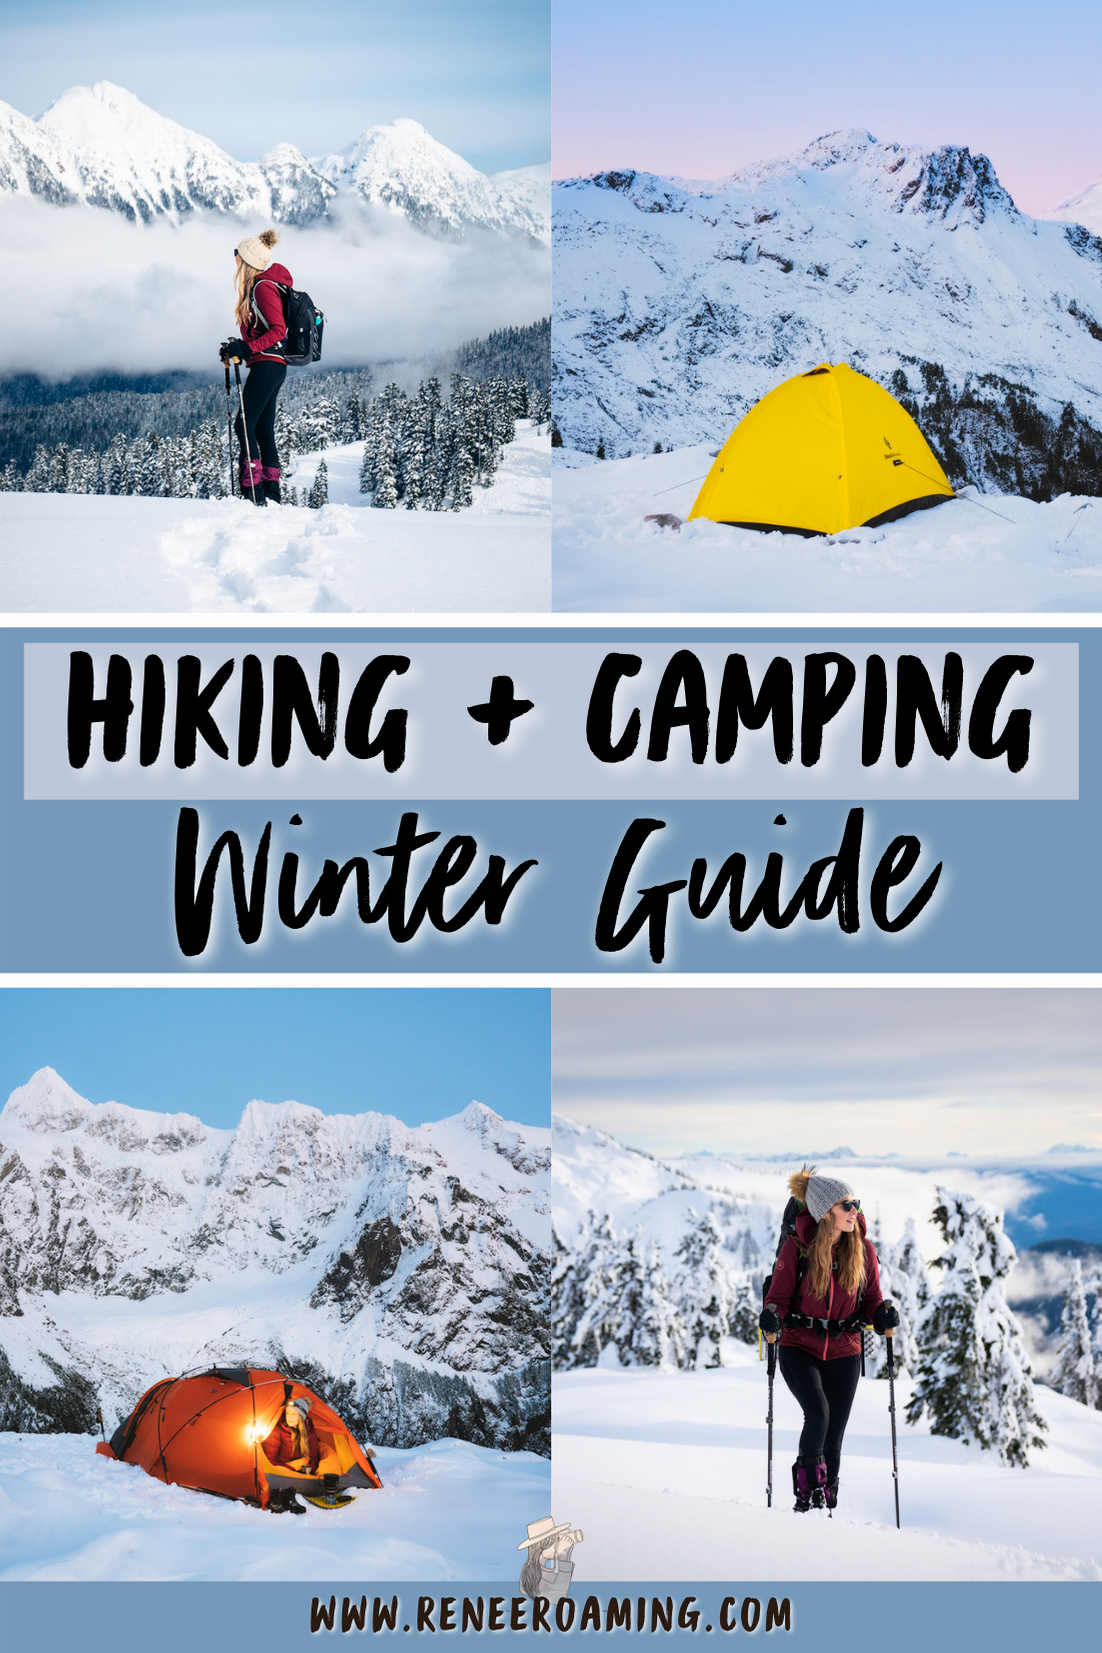 Ultimate Guide to Winter Hiking and Camping